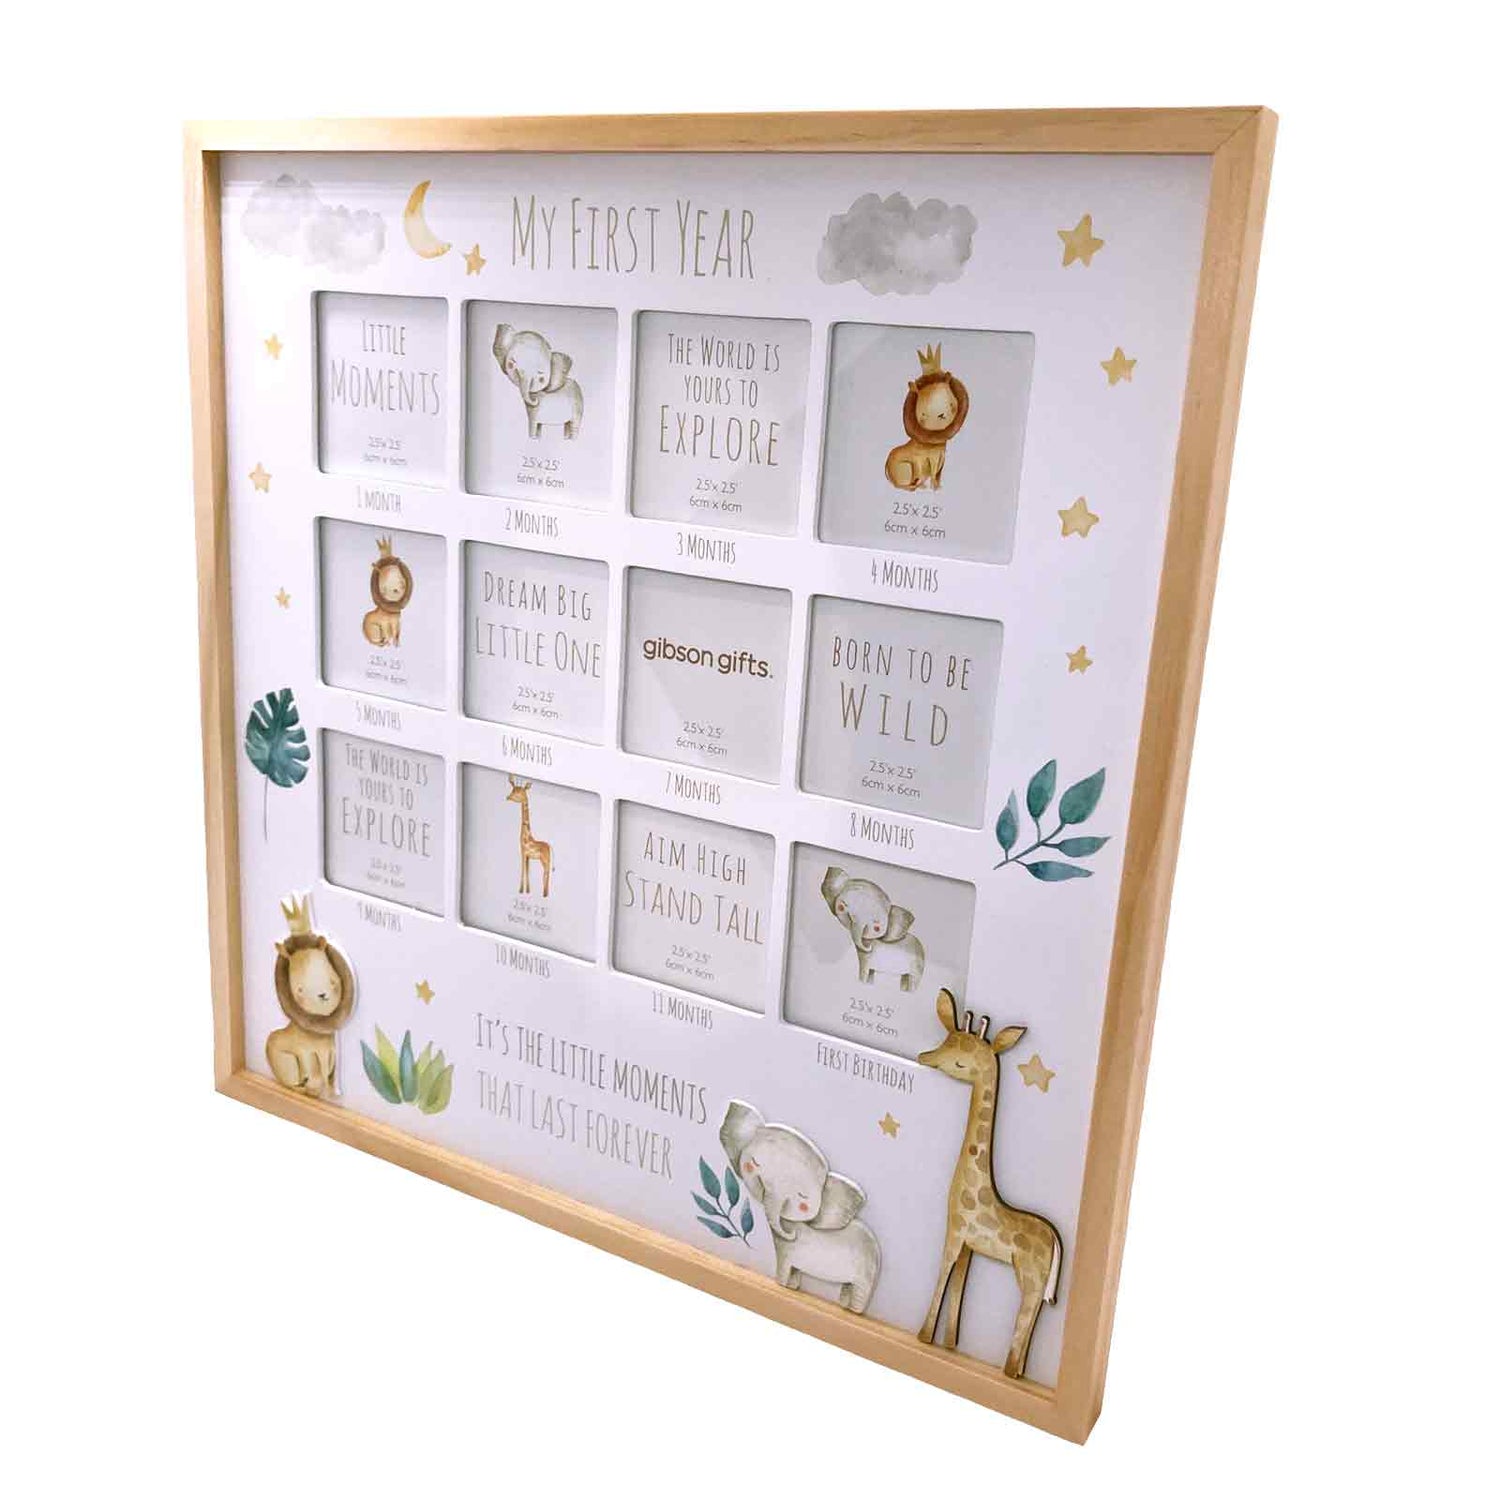 My First Year Little Moments Wooden Photo Frame